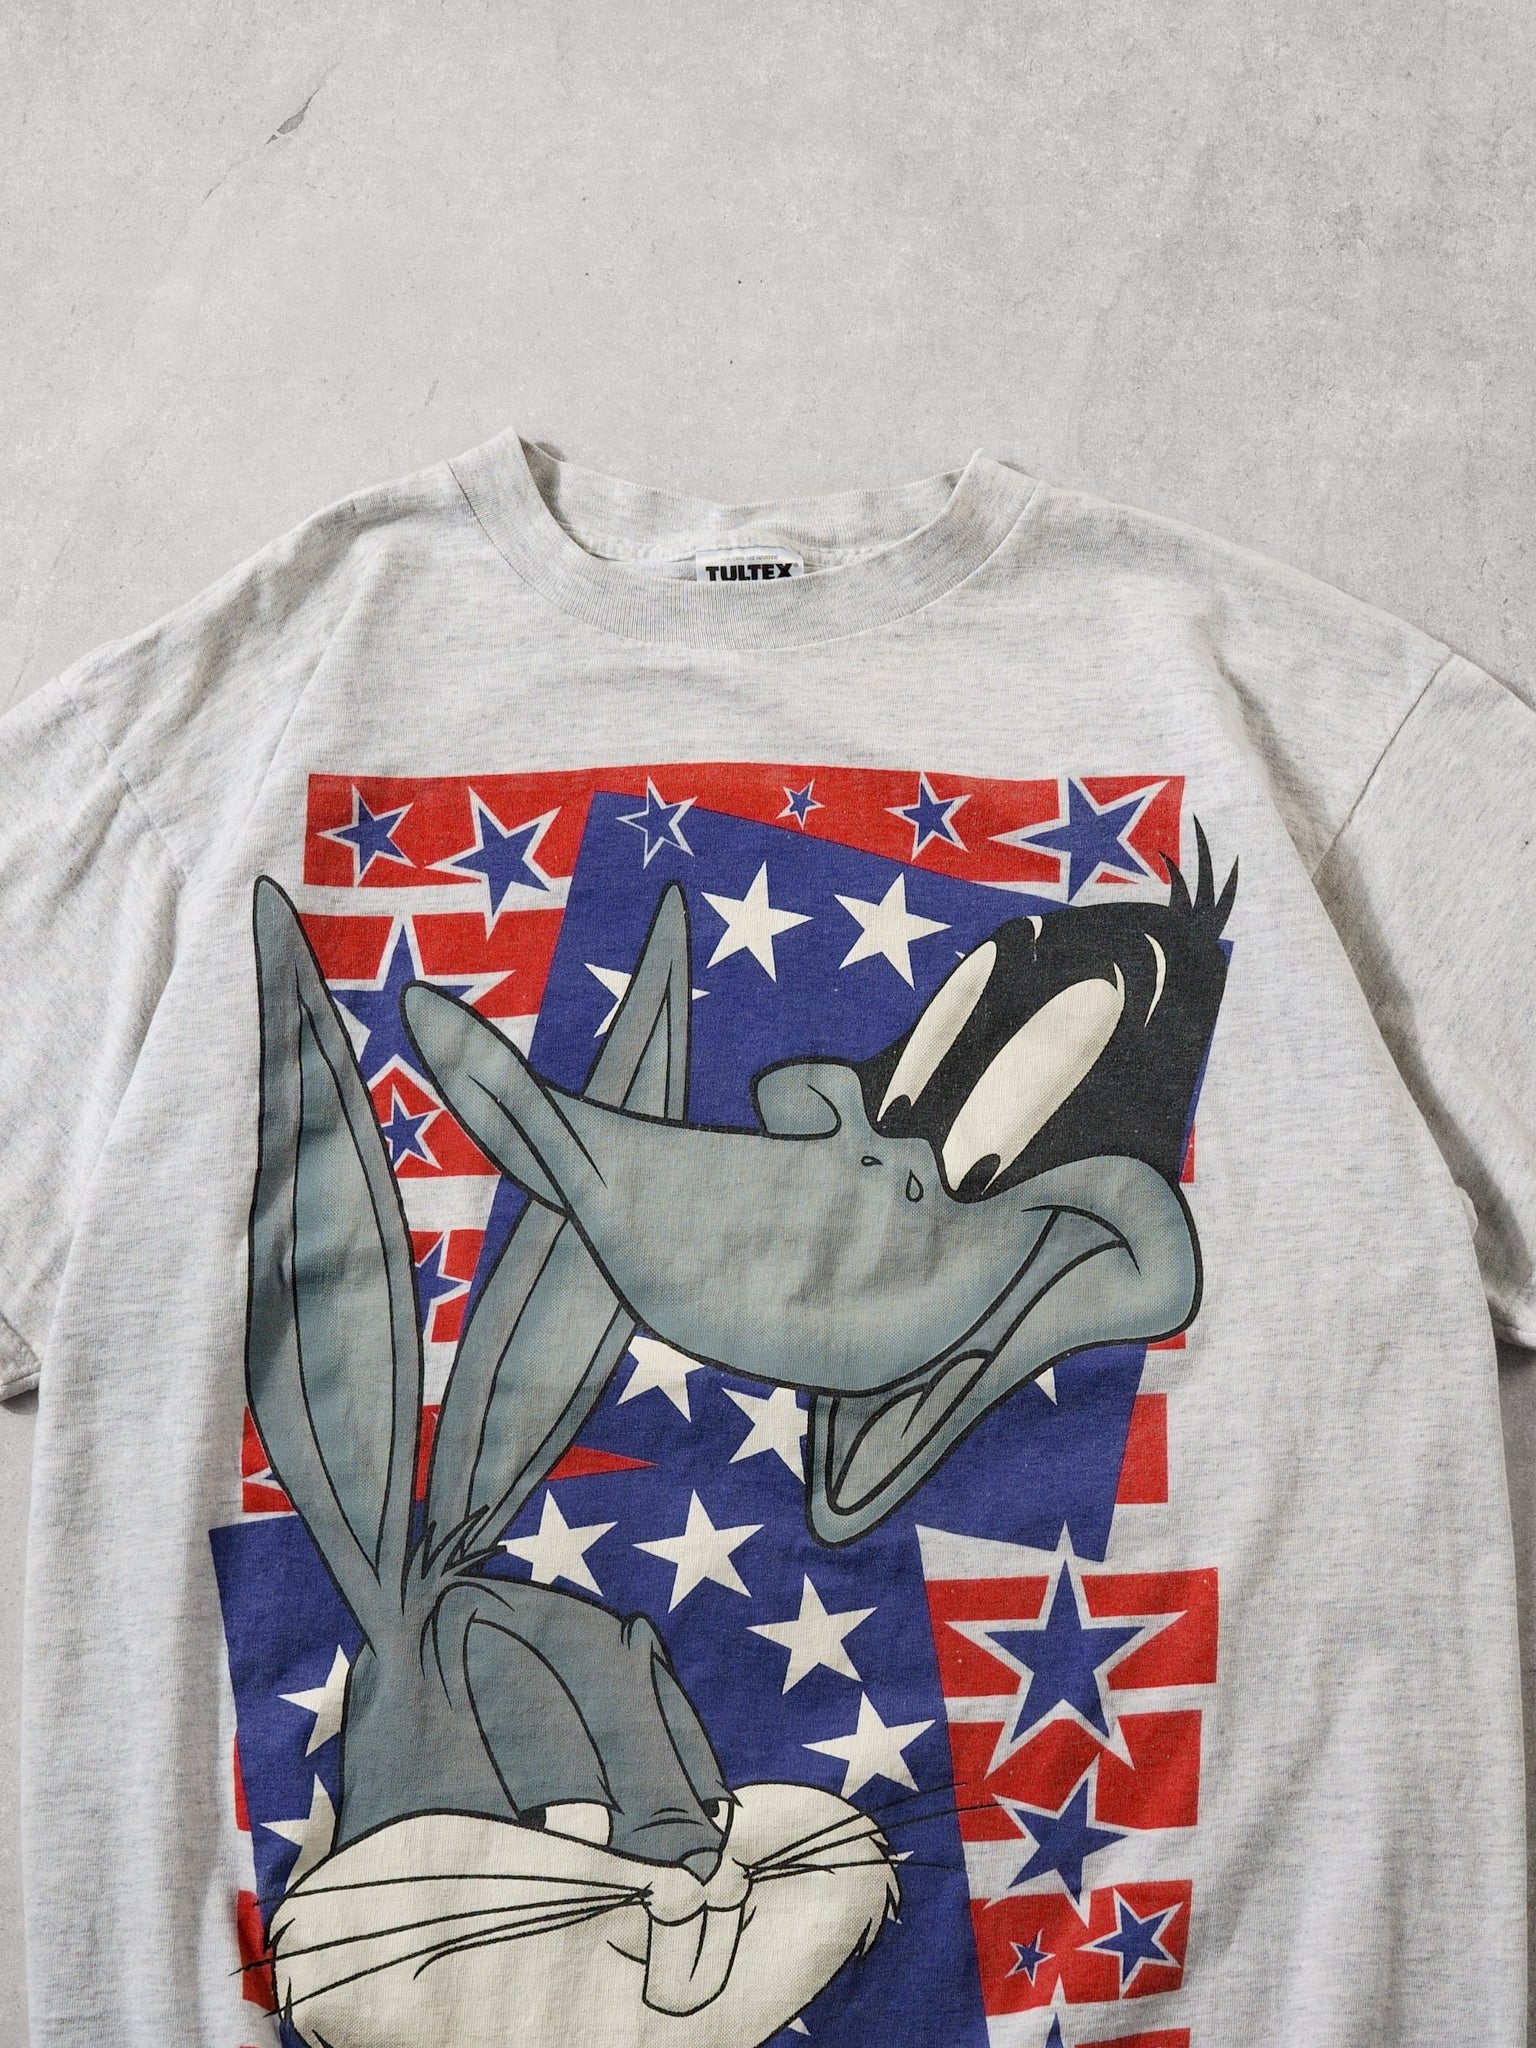 Vintage 95' Grey Bugs Bunny and Daffy Duck Stars Tee (L)